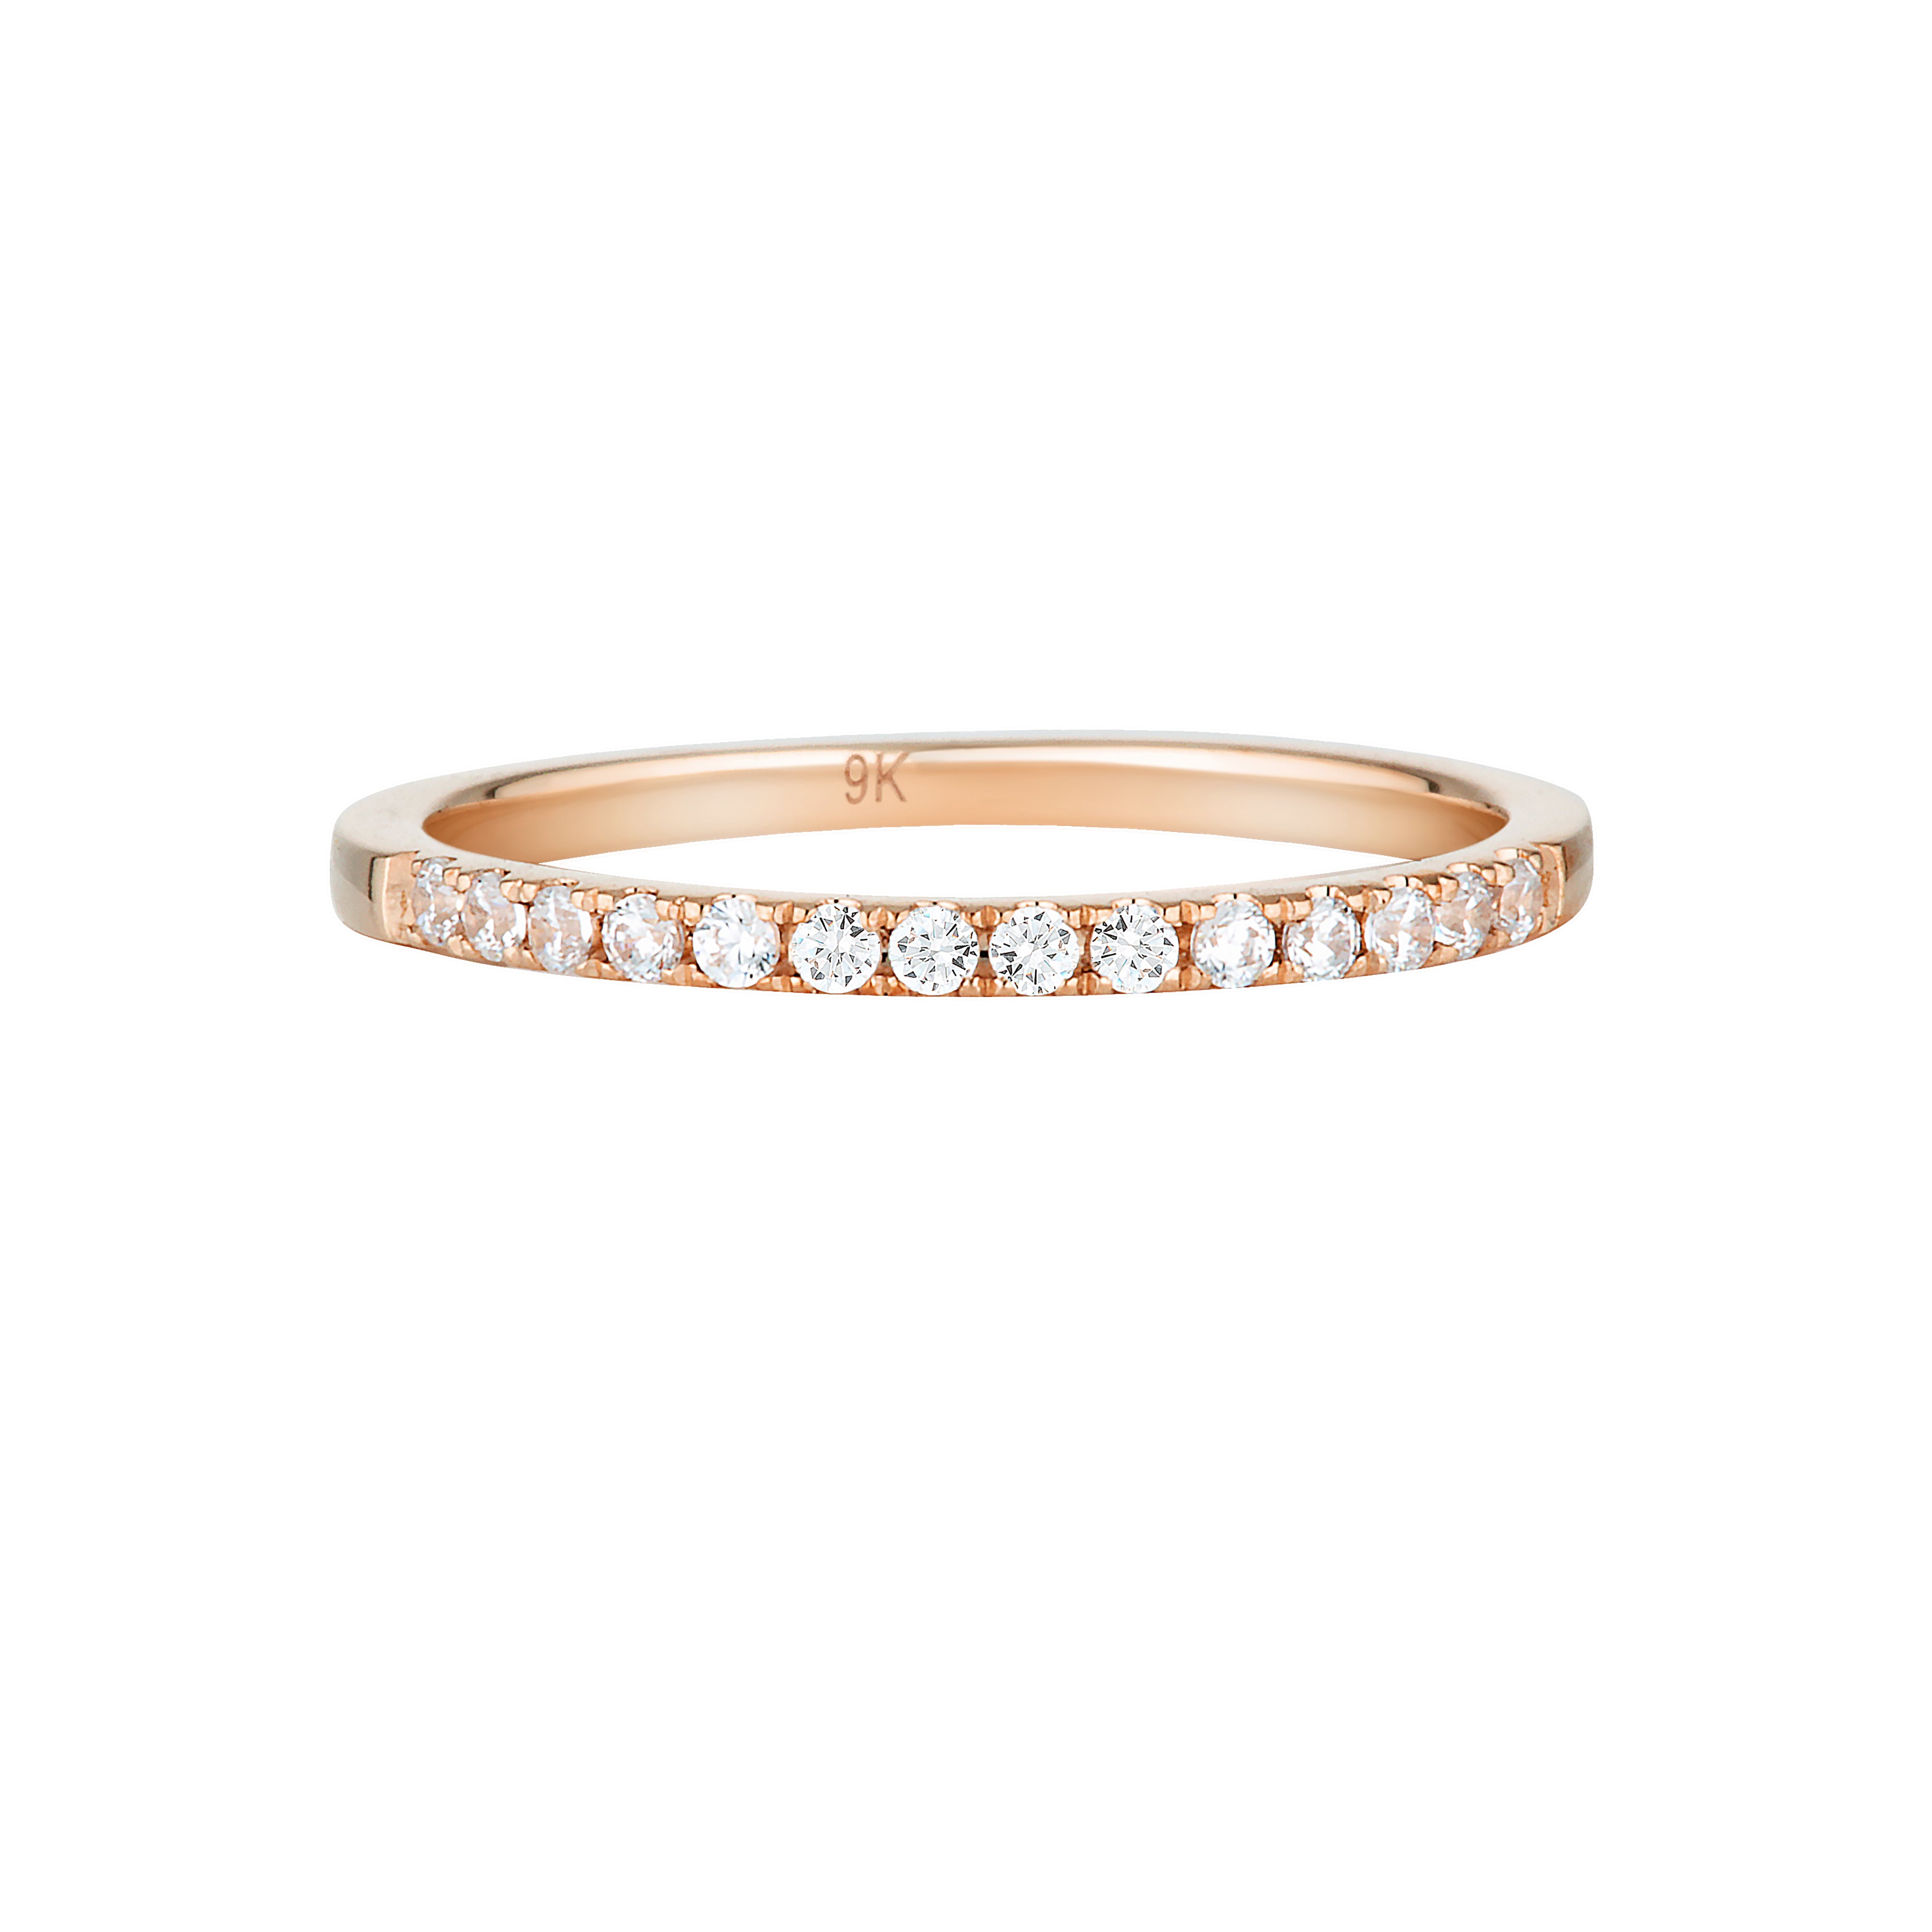 ROUND BRILLIANT CUT MOISSANITE WEDDING BAND IN 9CT ROSE GOLD